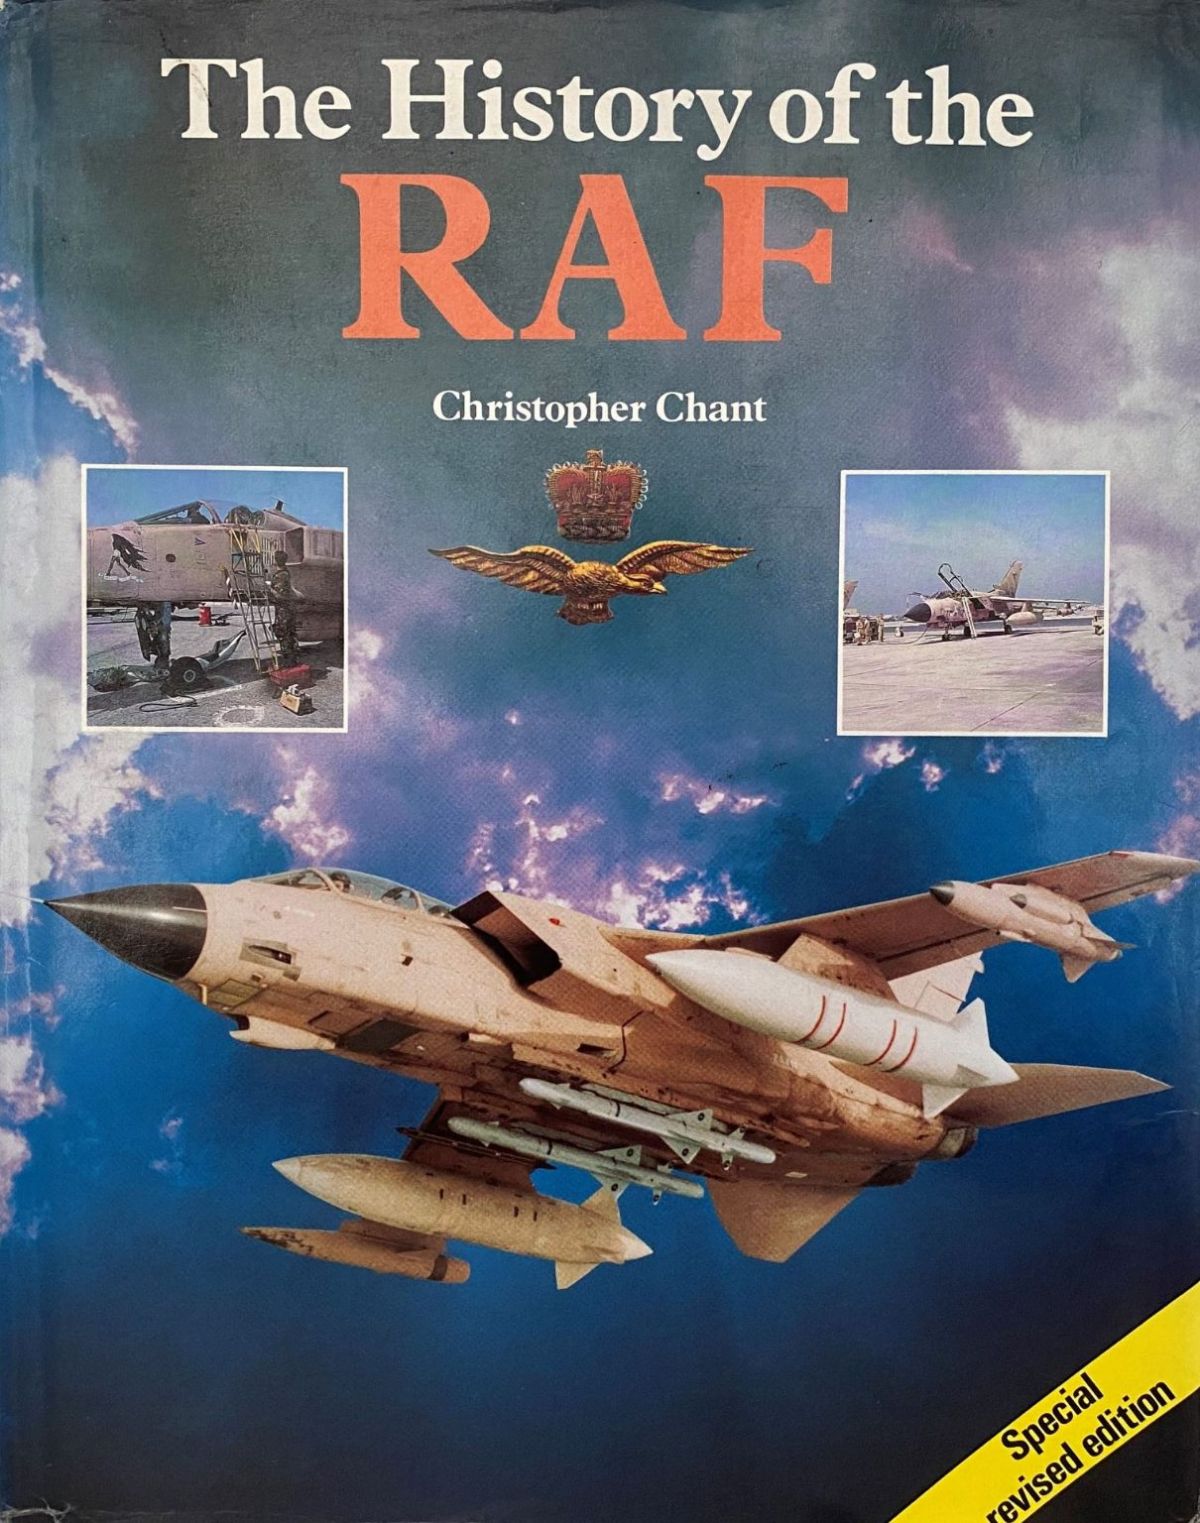 THE HISTORY OF THE RAF